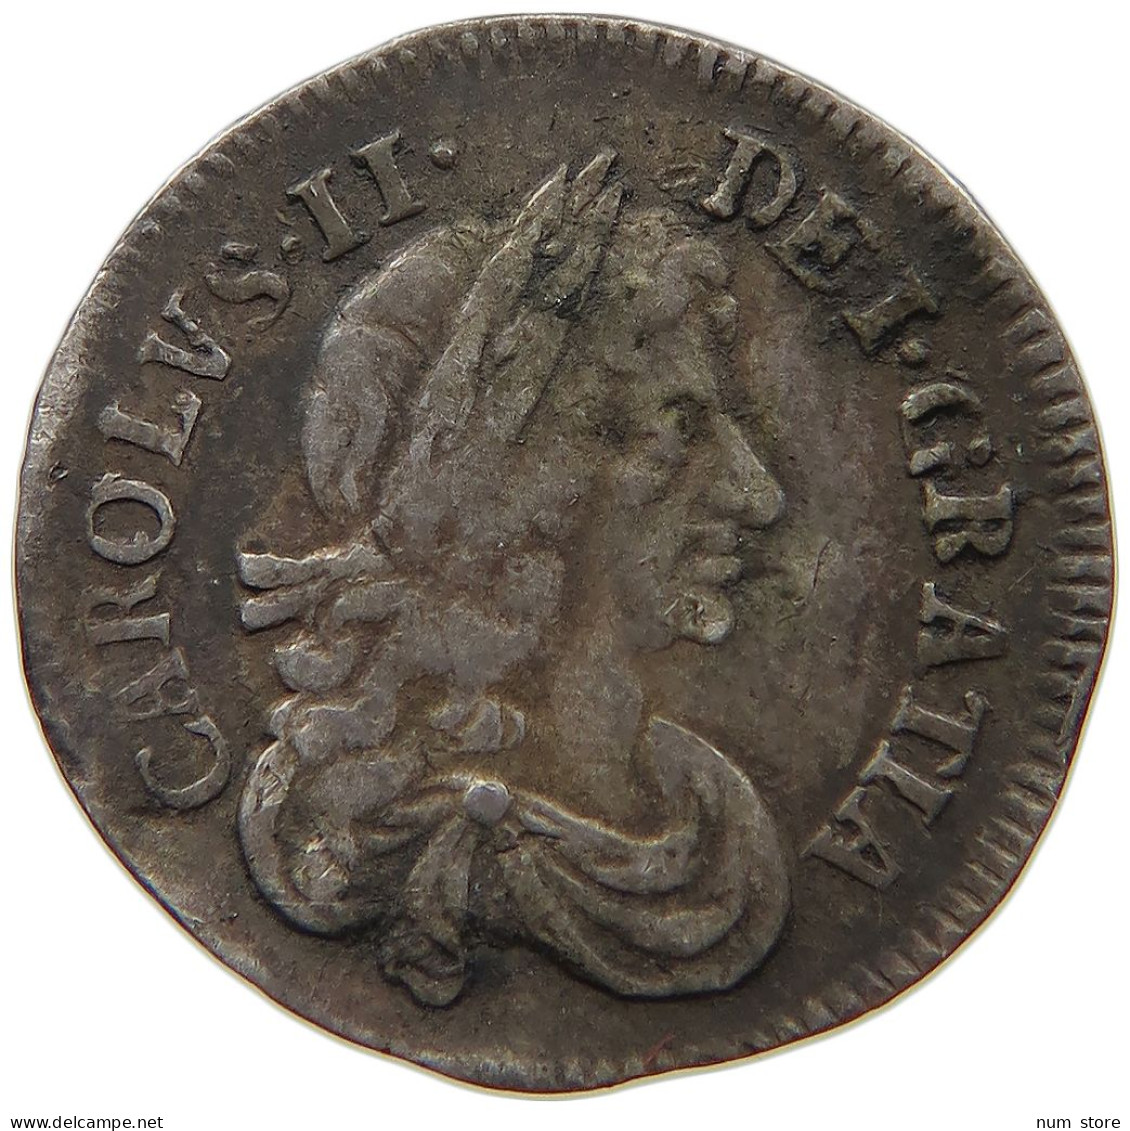 GREAT BRITAIN THREEPENCE 1677 CHARLES II. (1660-1685) MAUNDY #t138 0411 - E. 3 Pence